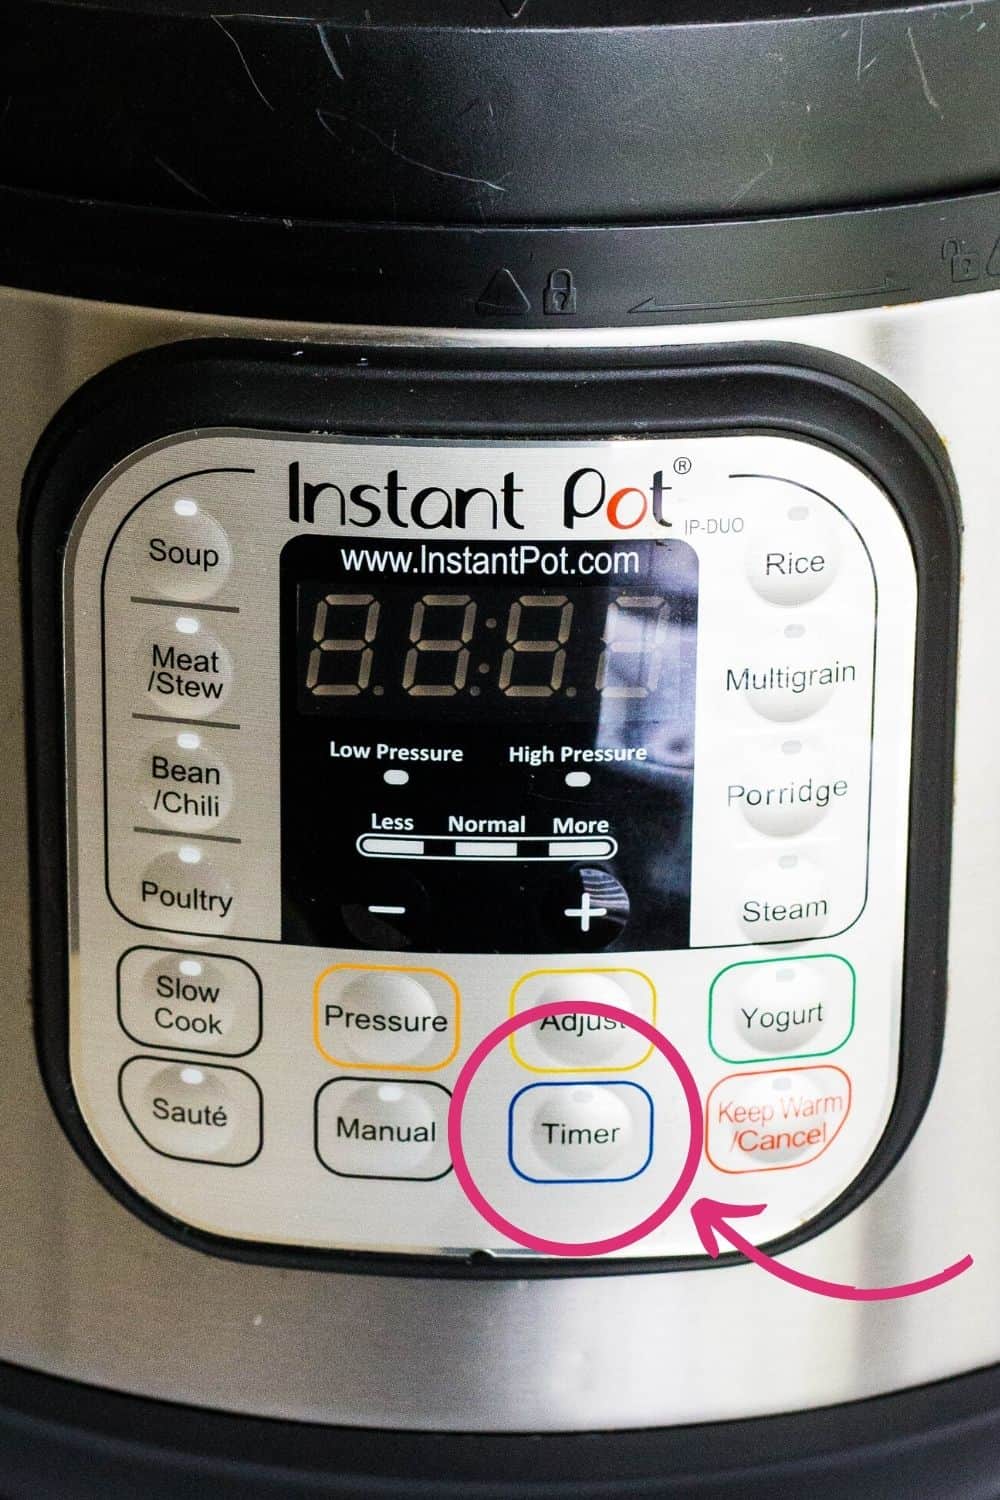 close-up of an Instant Pot Timer button on the control panel